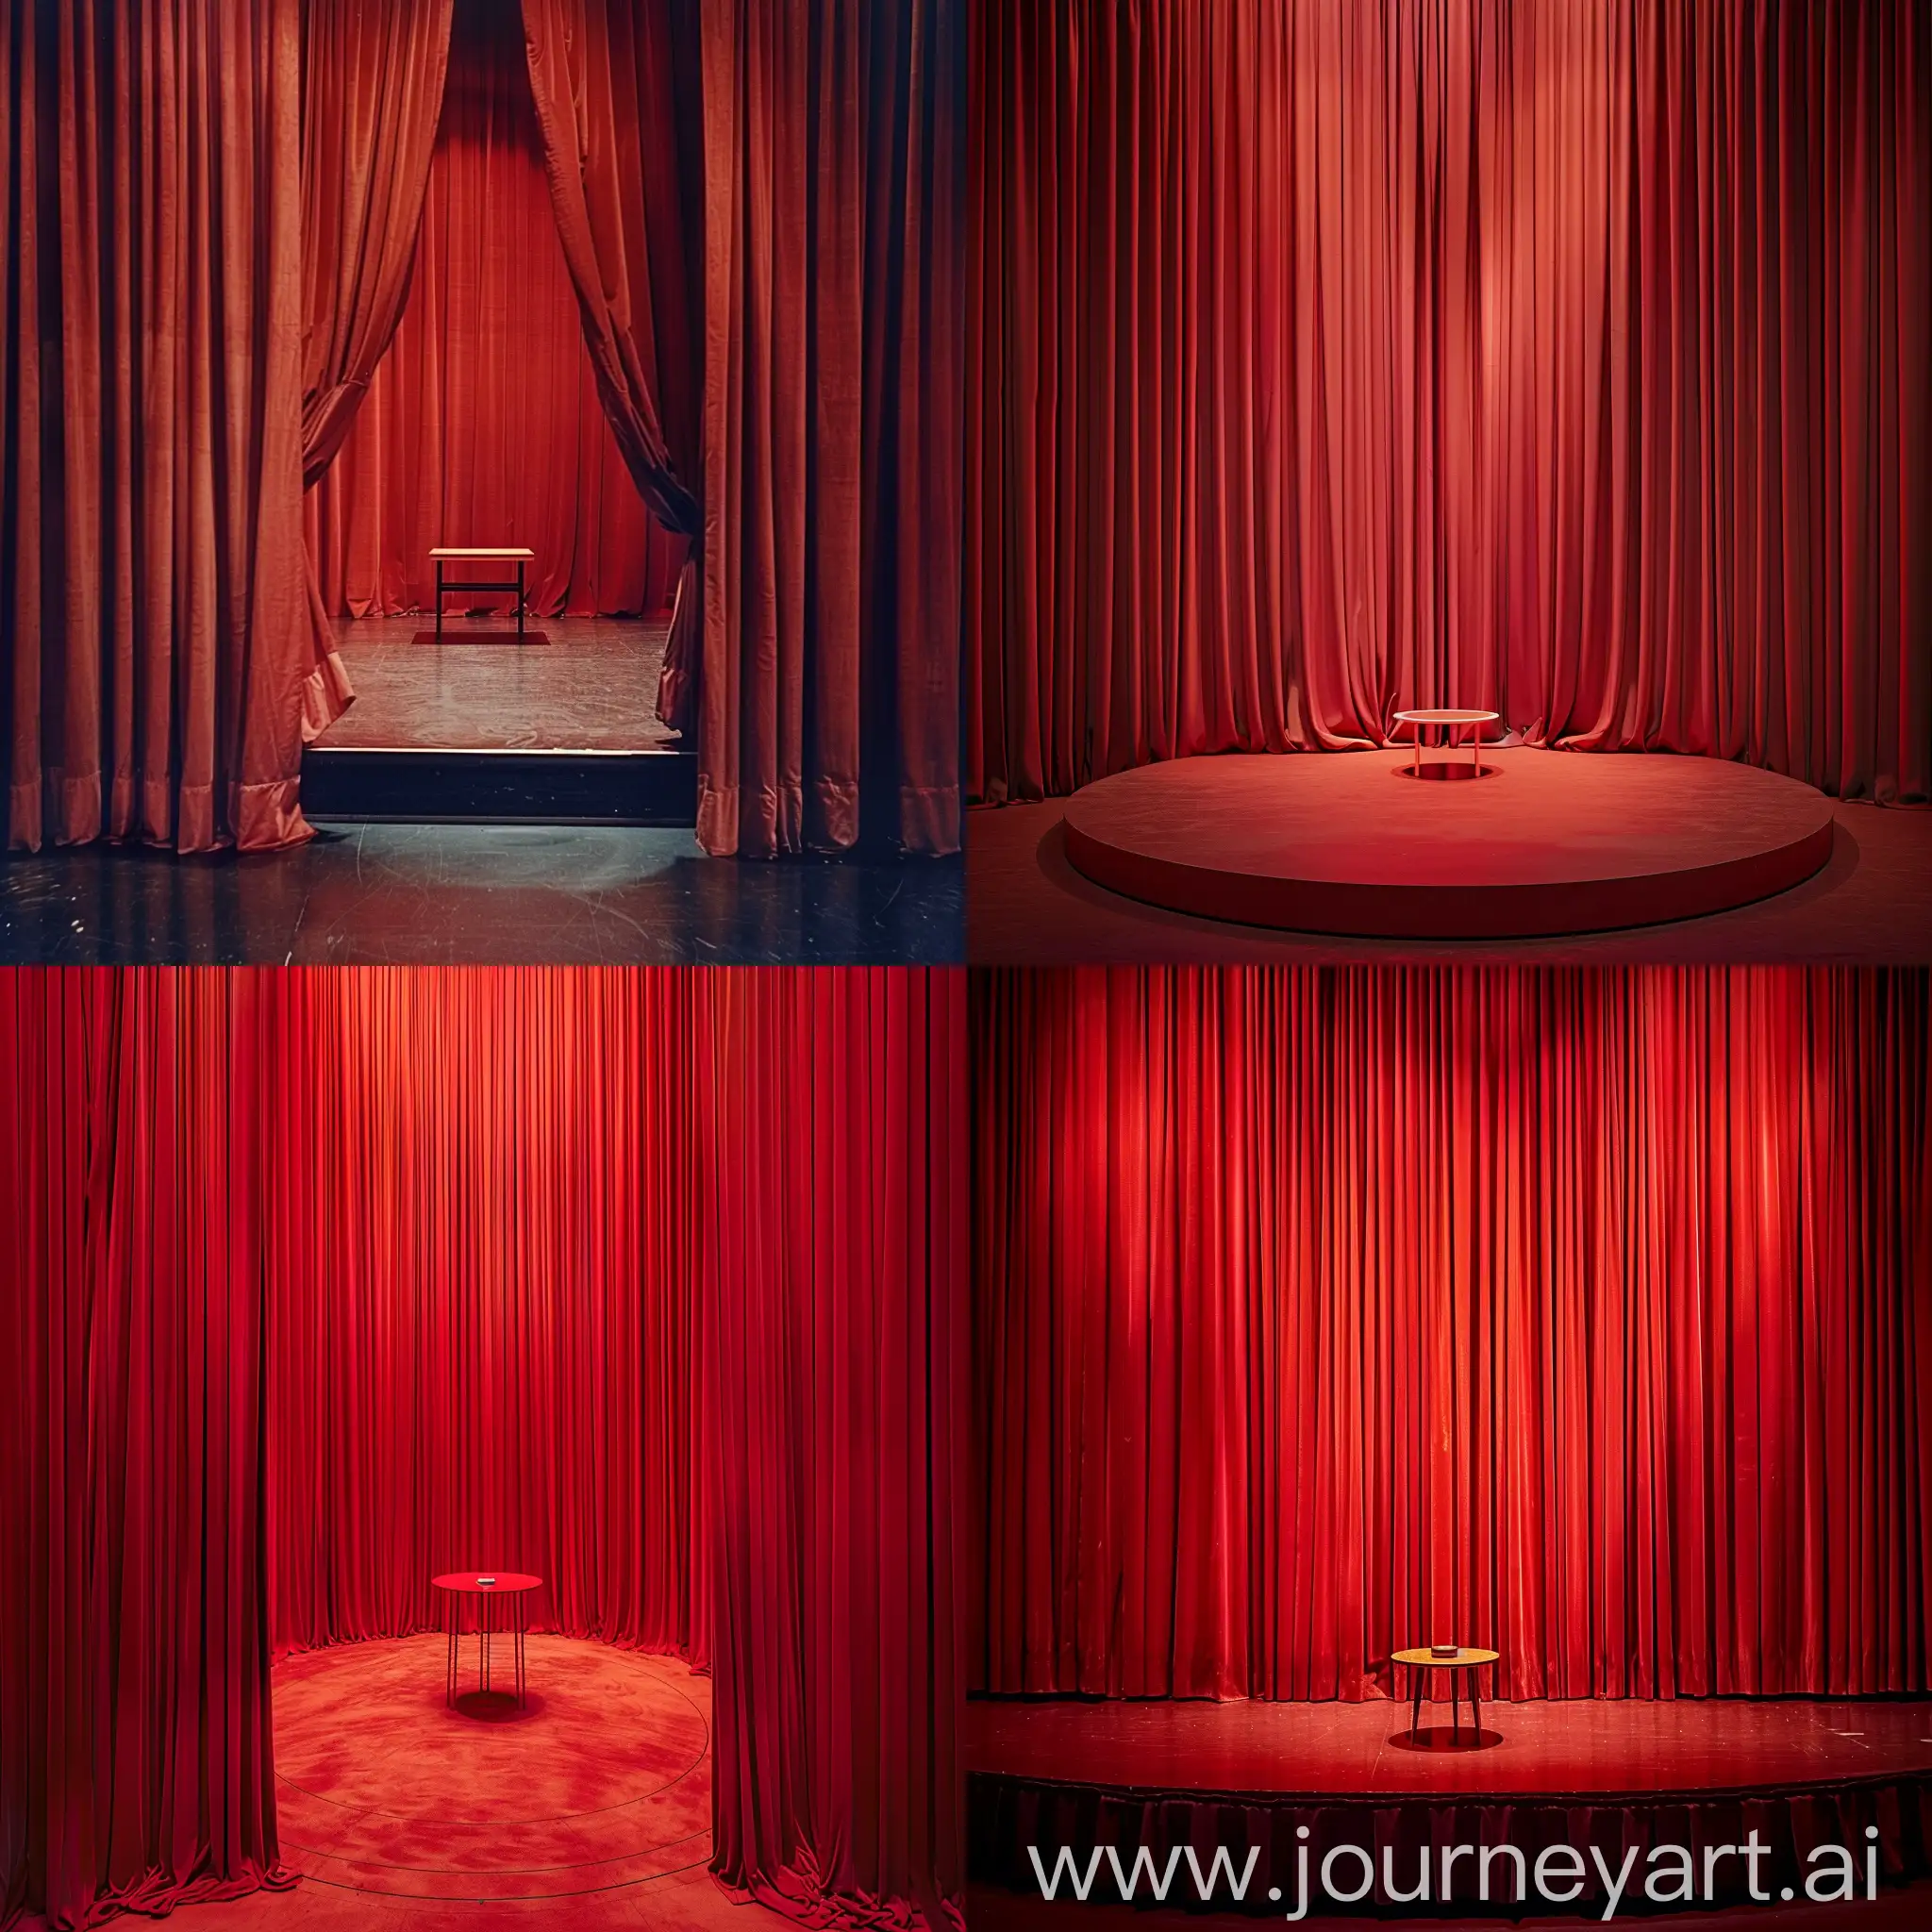 Theatrical-Stage-with-Red-Curtain-and-Open-Table